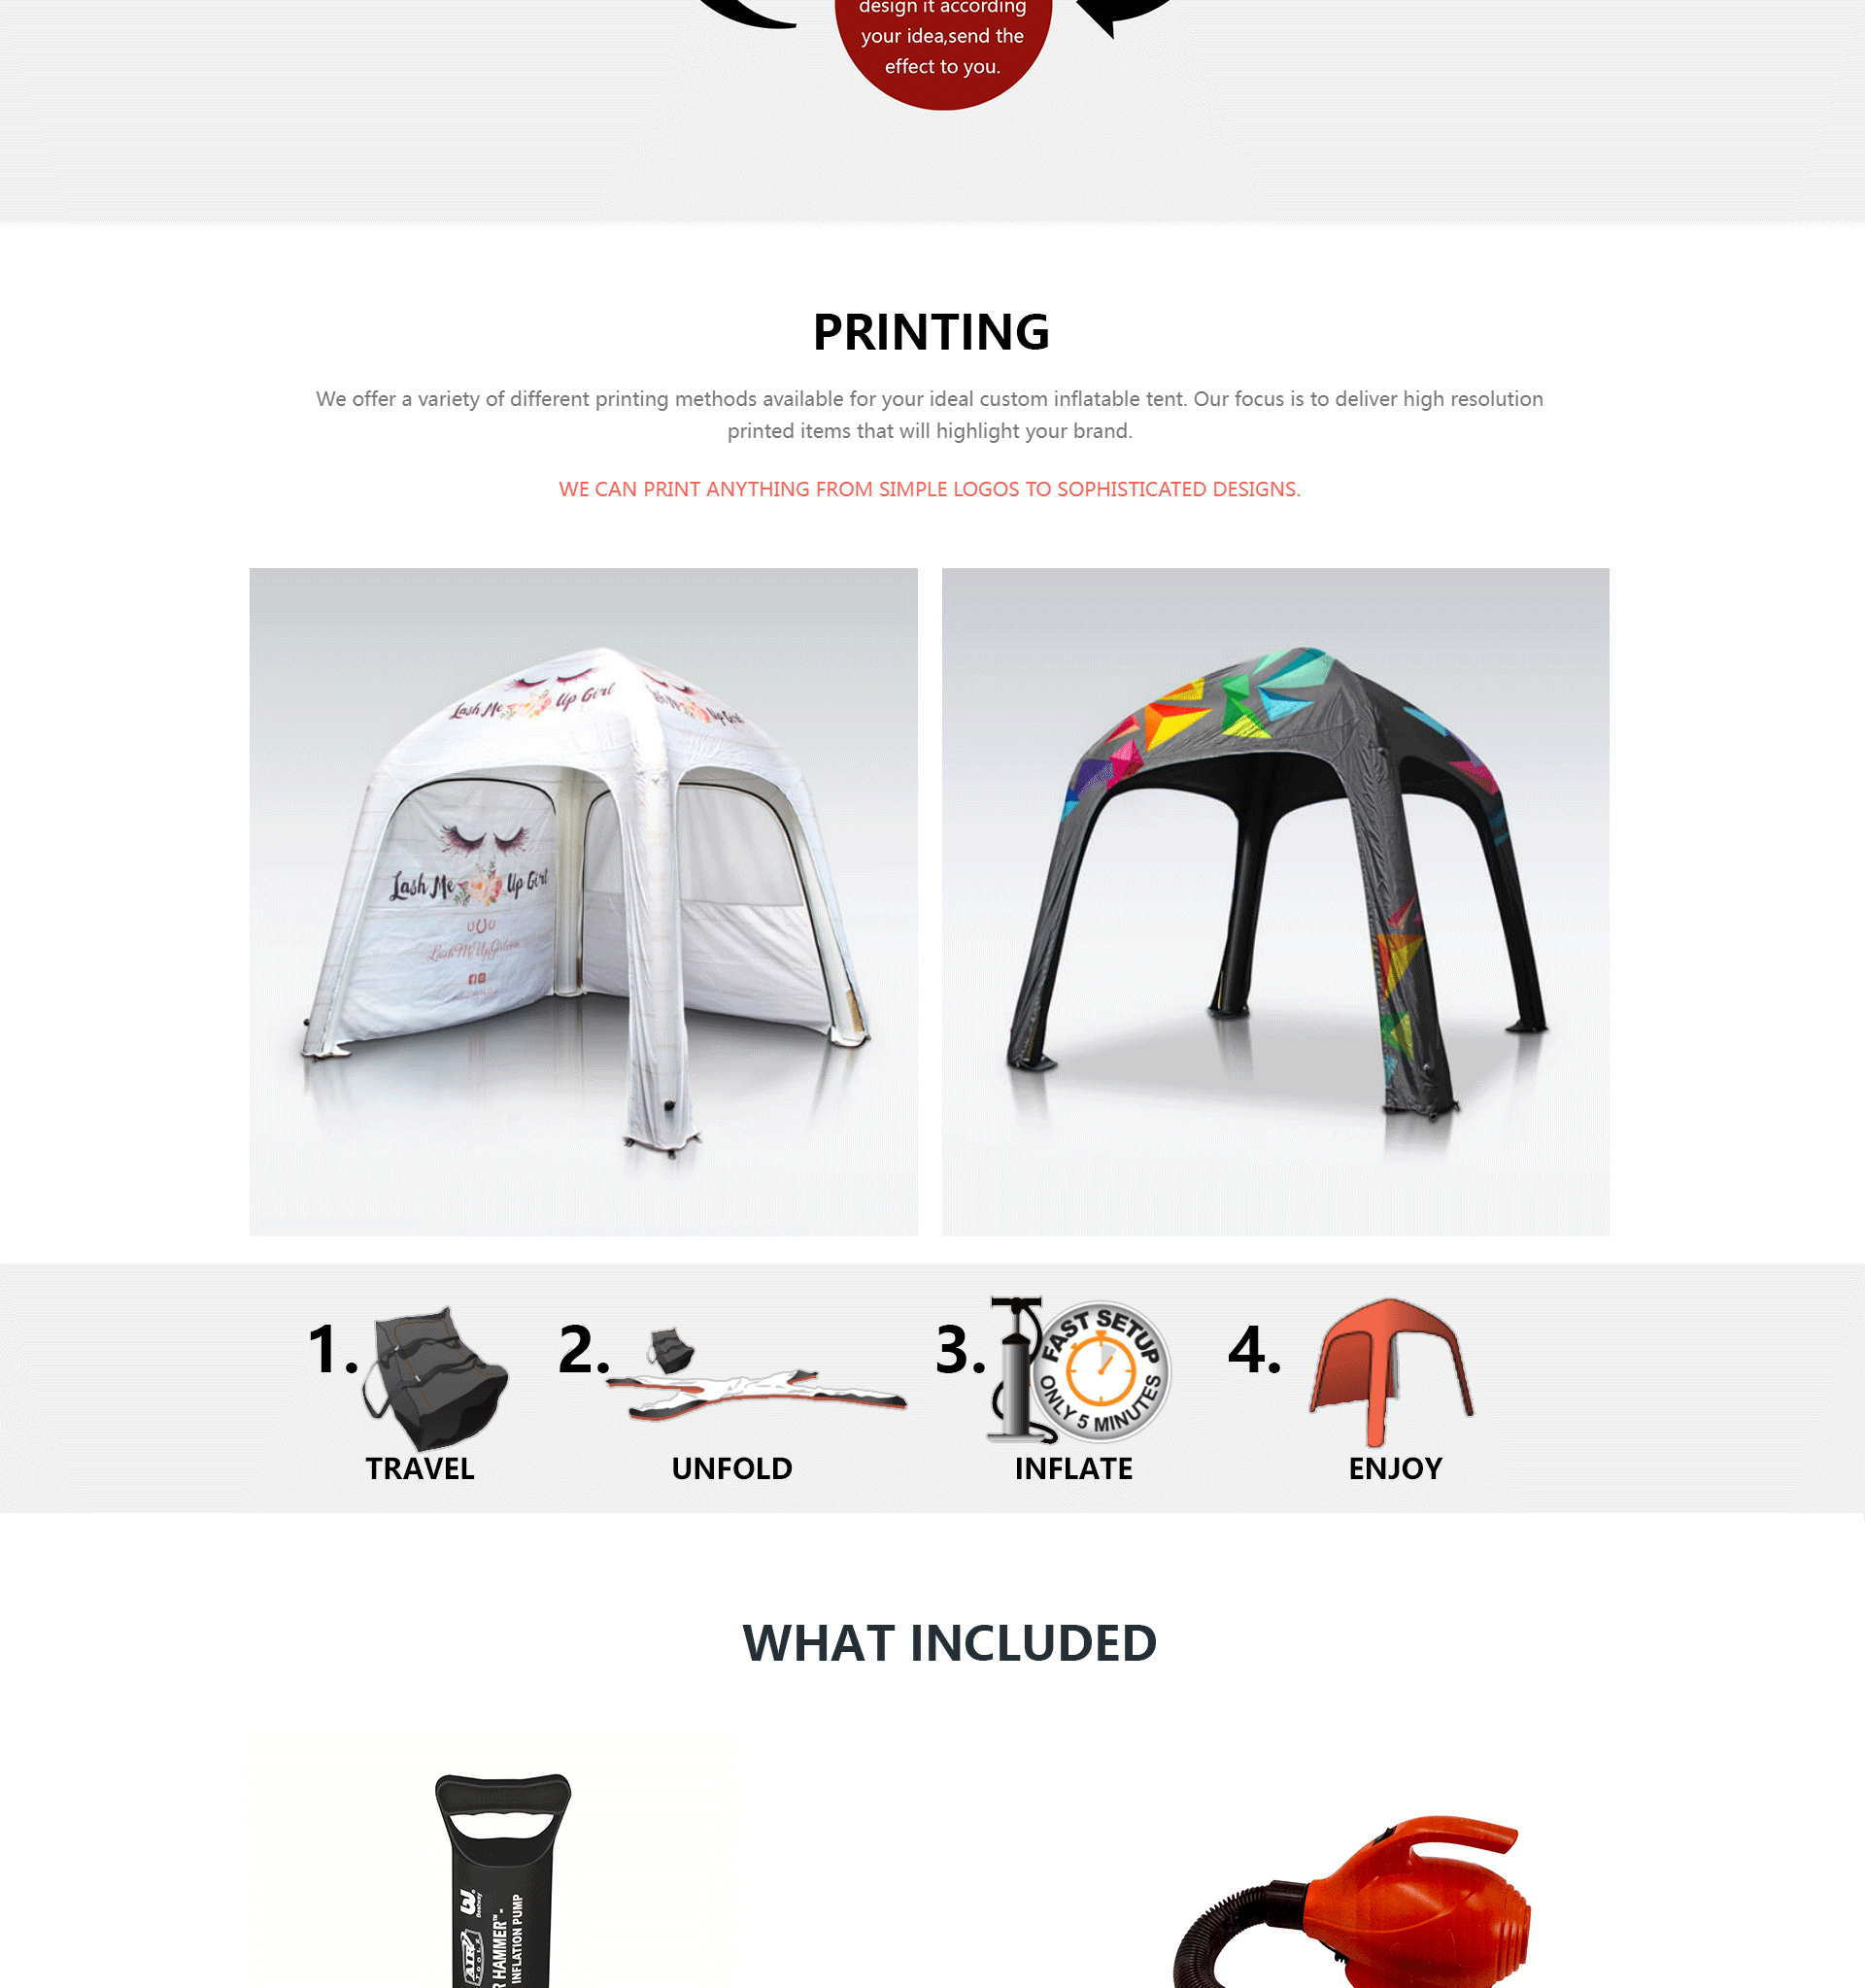 Custom ECLIPSE Tent design with inflatable features